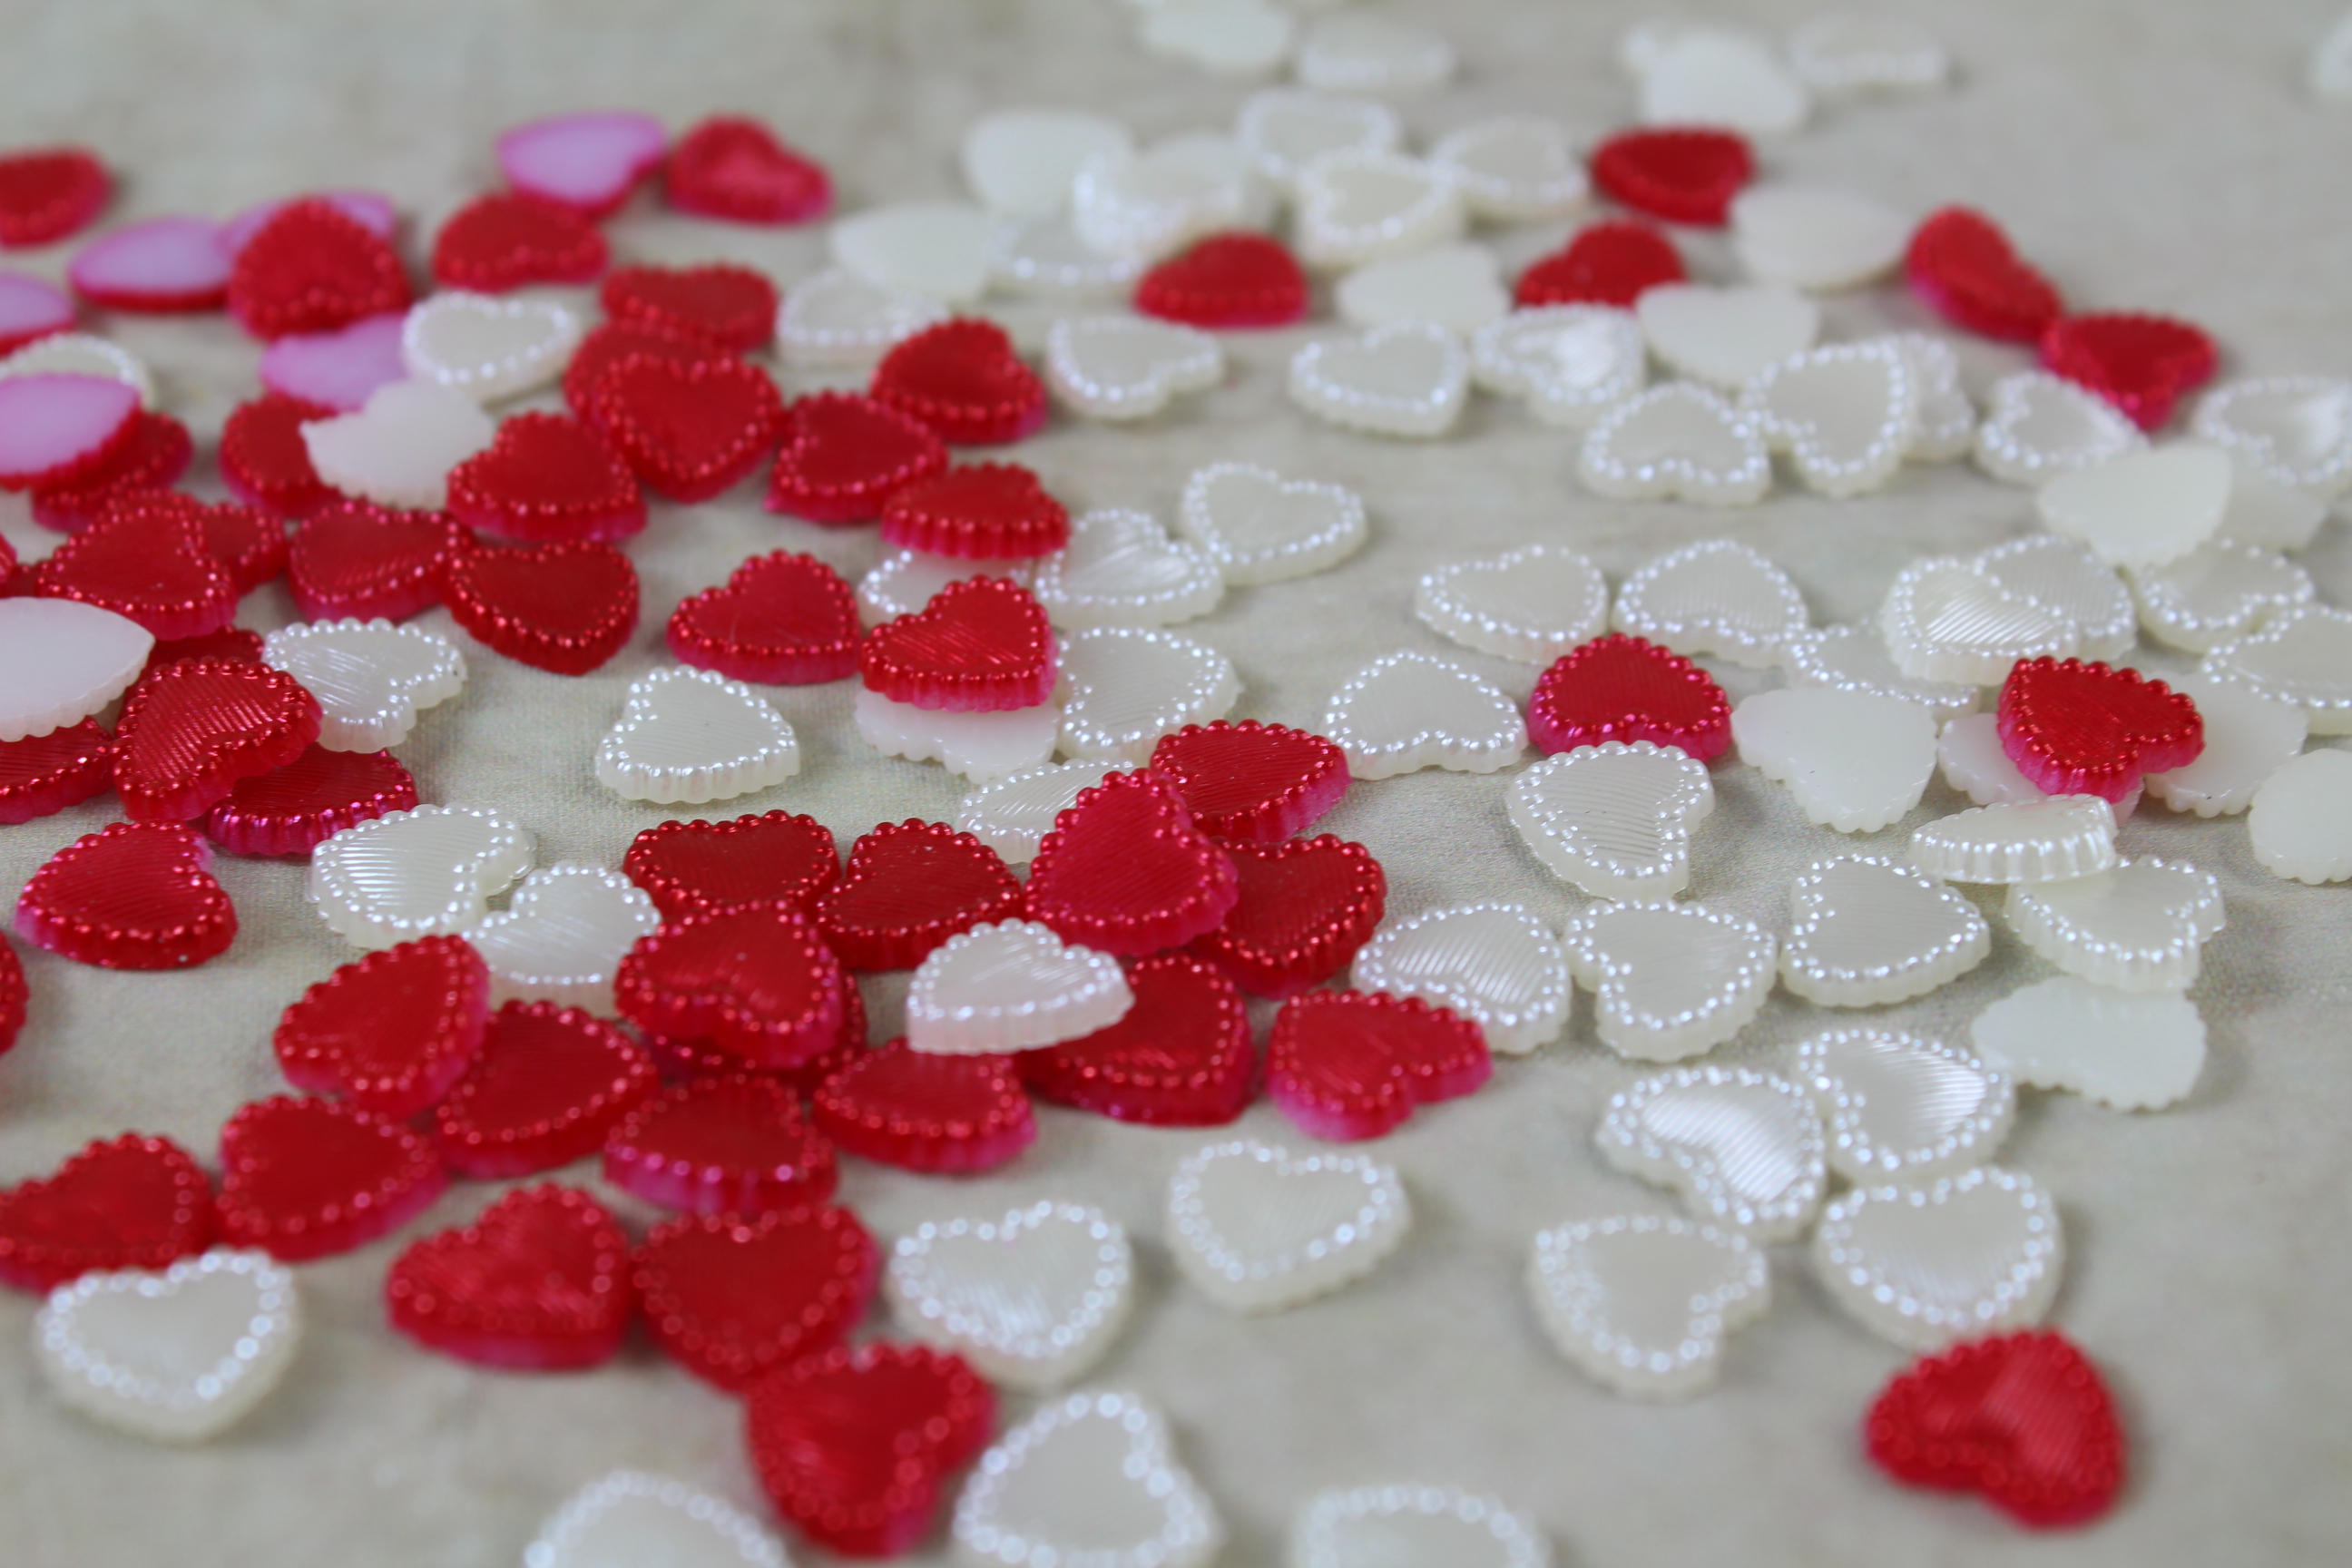 10mm Fabricated Scatter Hearts - BUY 3 PACKETS FOR THE PRICE OF 2!